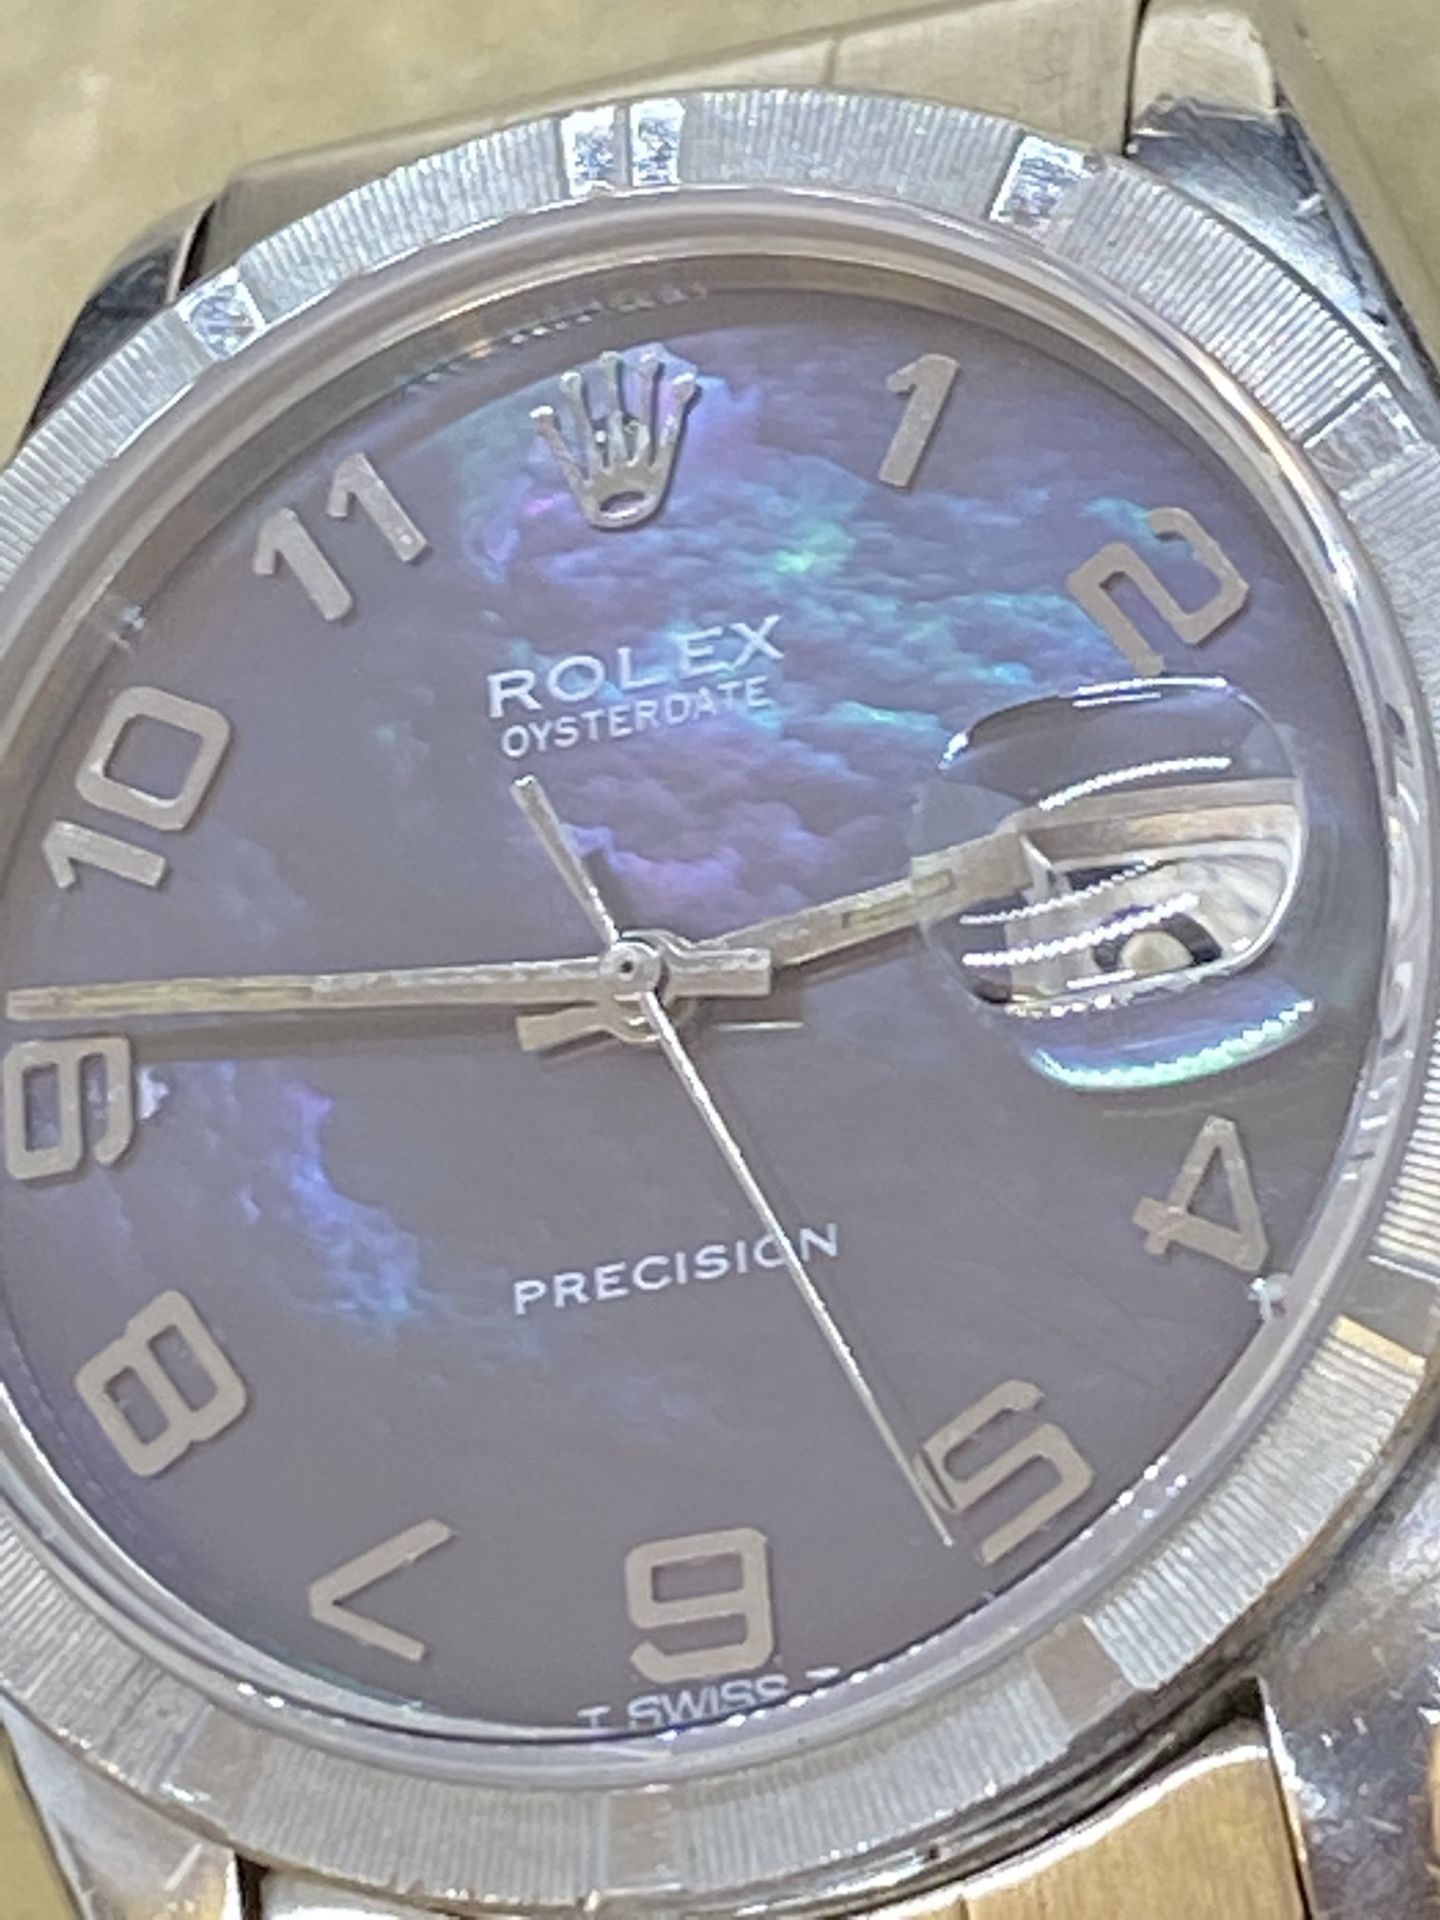 ROLEX OYSTERDATE PRECISION WATCH - Image 13 of 15